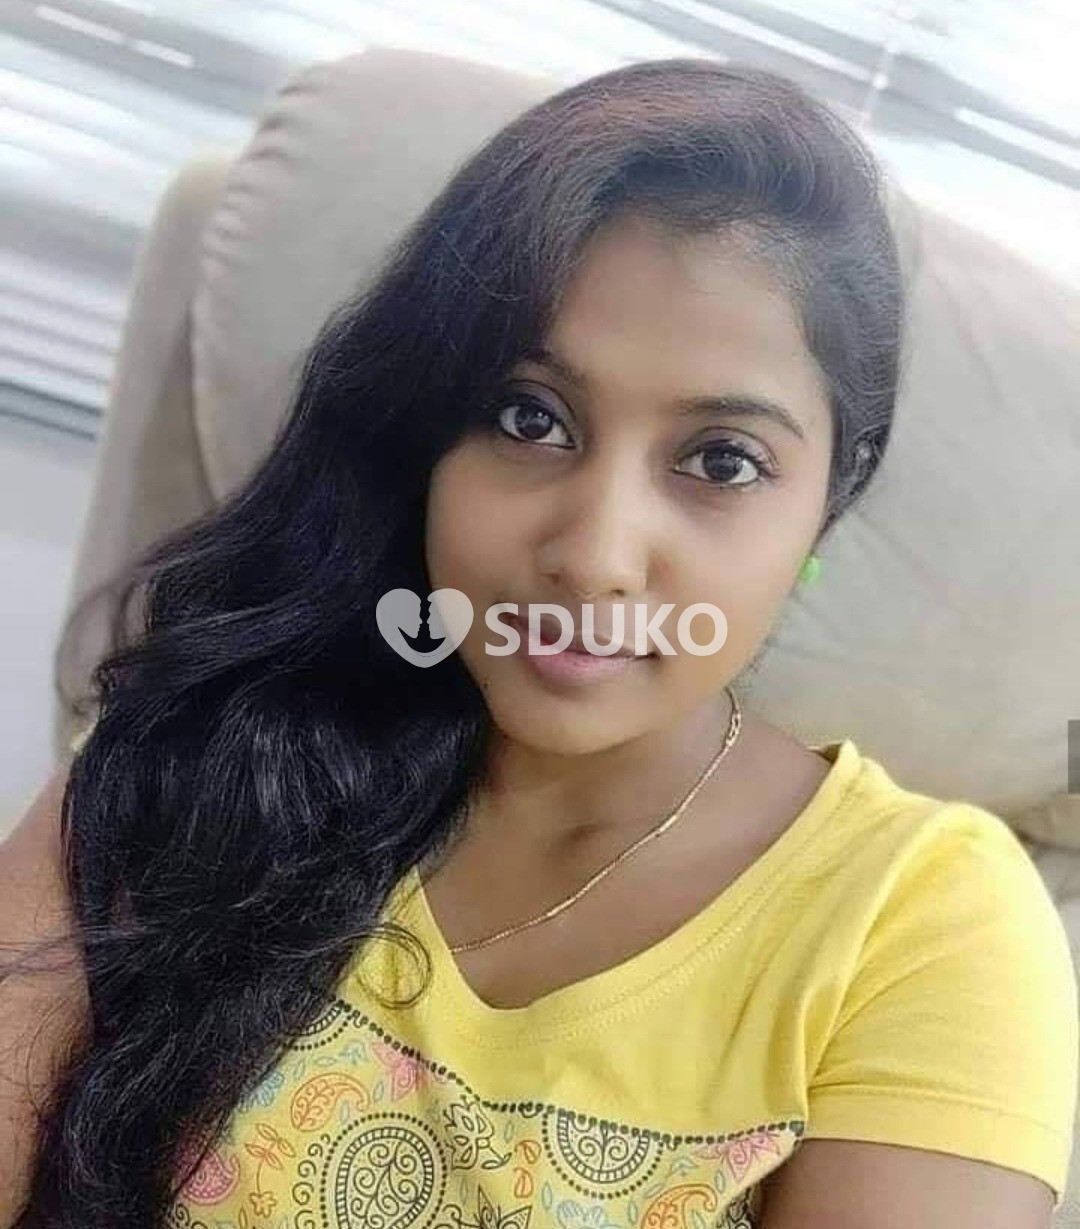 Pondicherry❣️100% SAFE AND SECURE TODAY LOW PRICE UNLIMITED ENJOY HOT COLLEGE GIRLS AVAILABLE